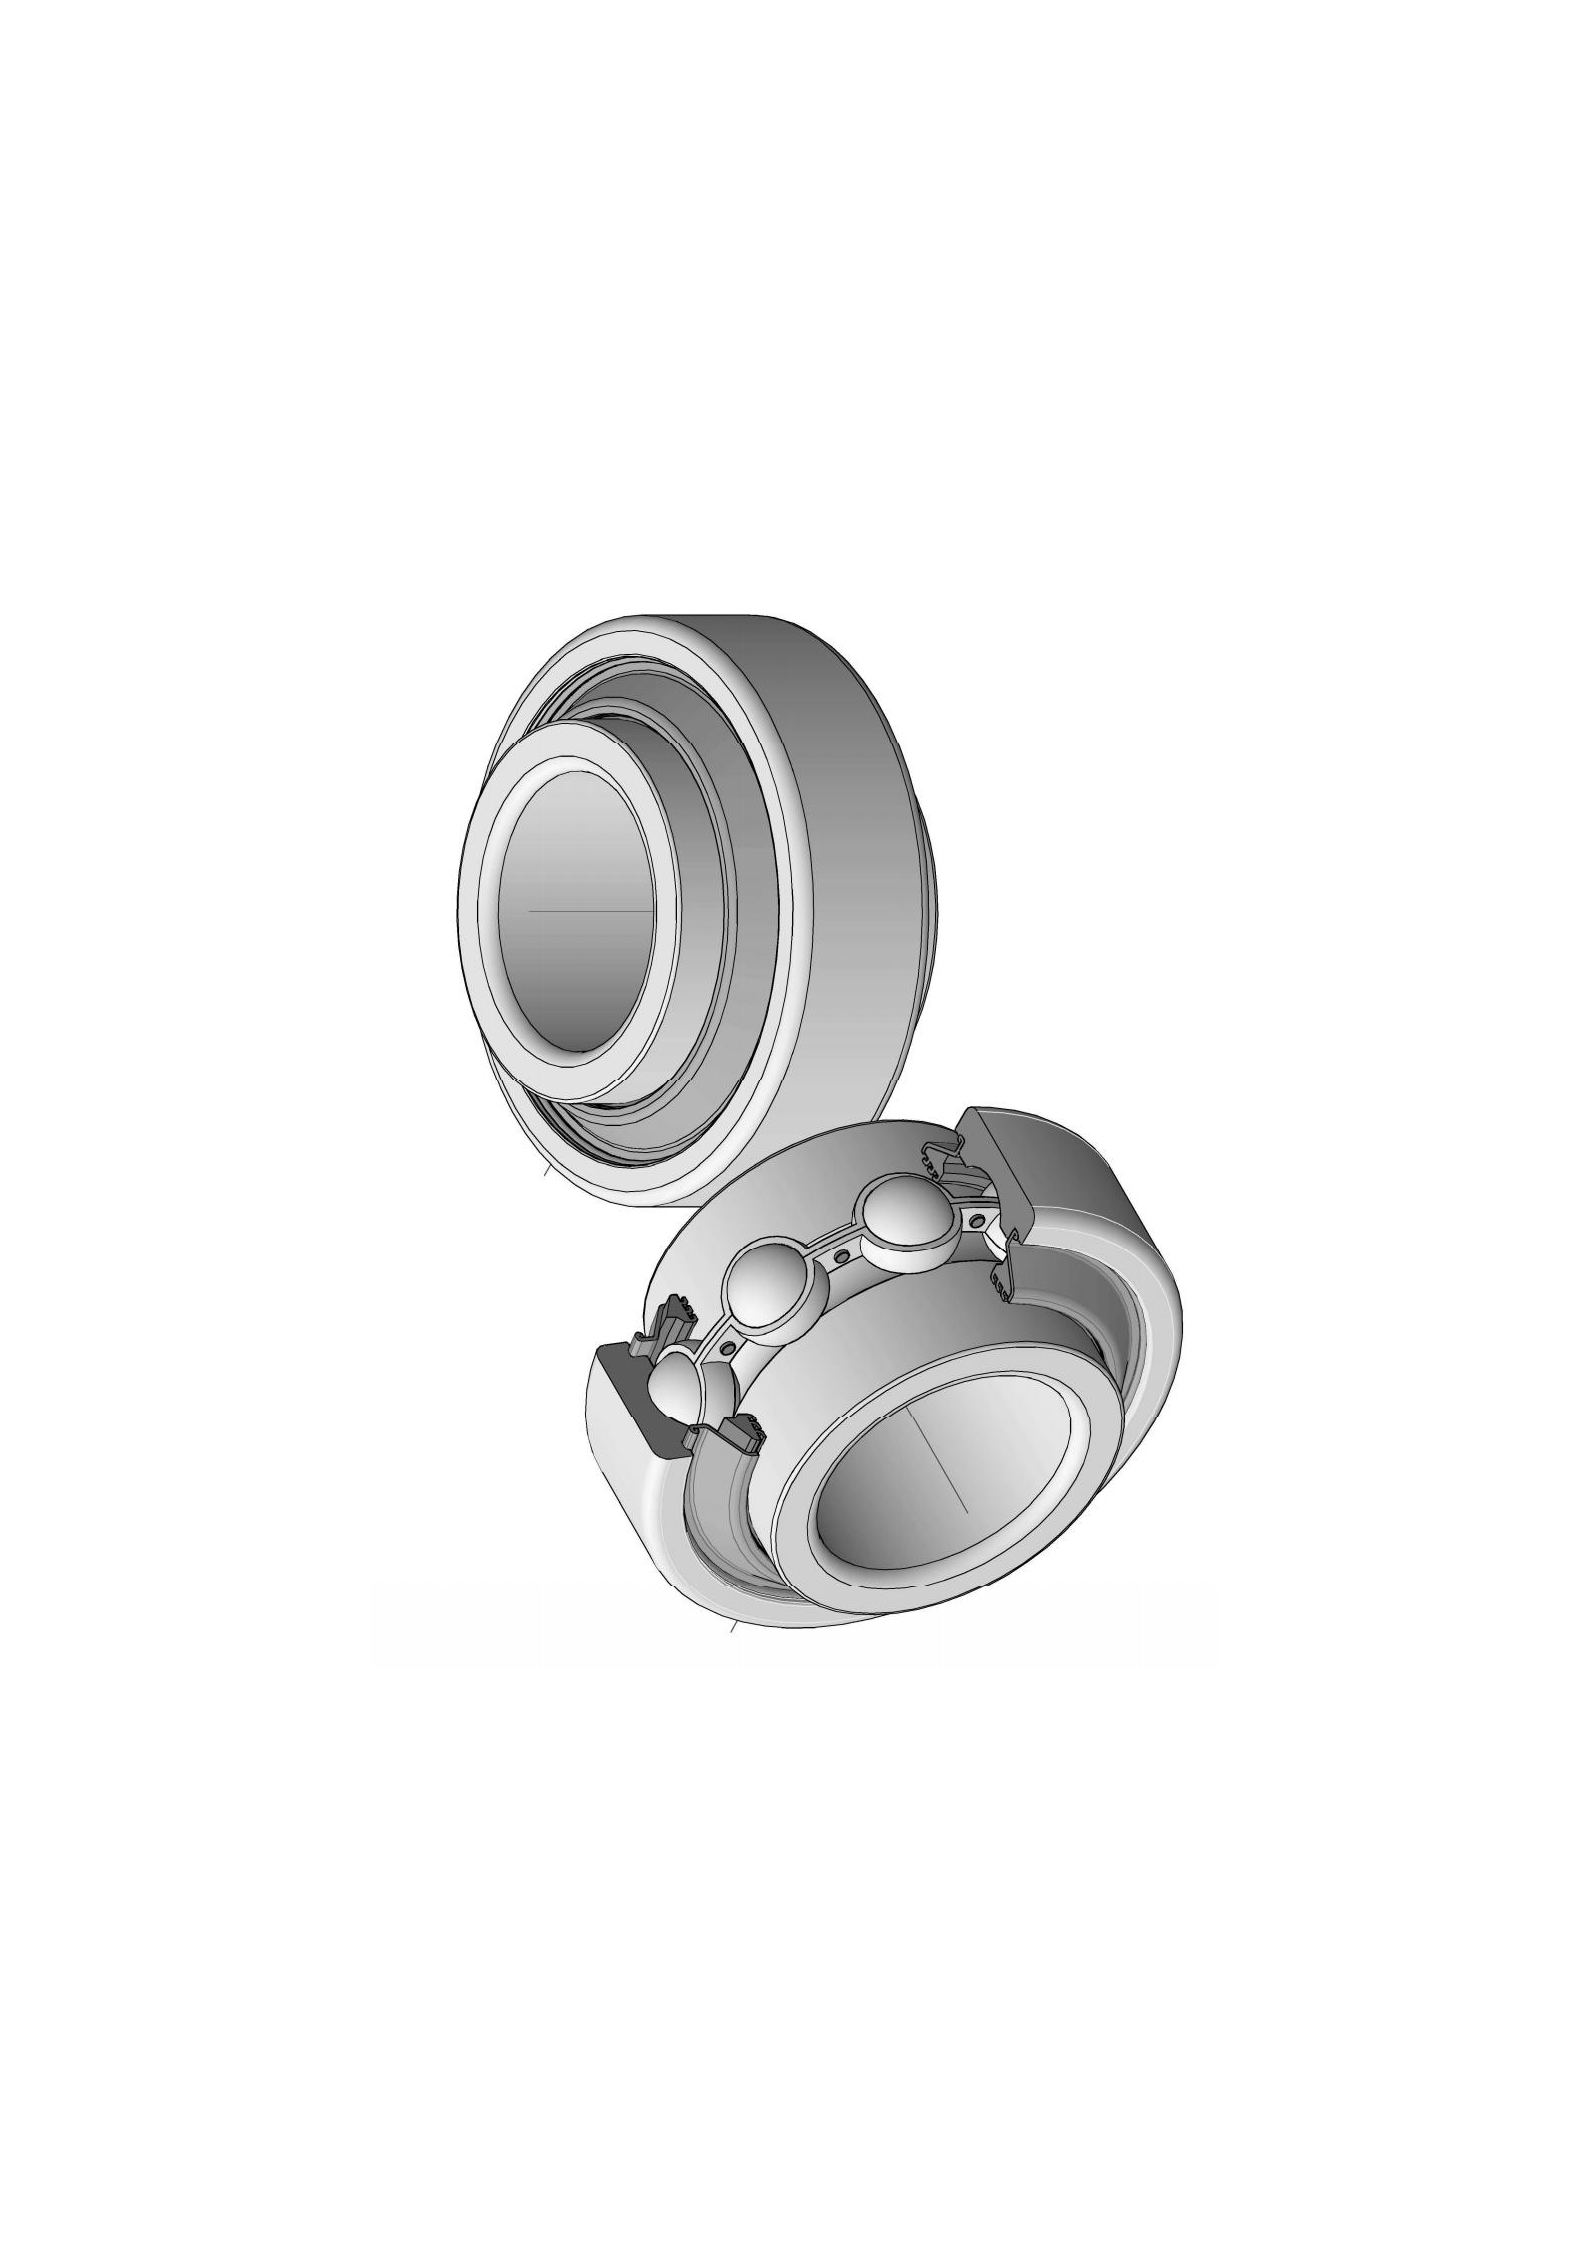 Top Quality Custom Needle Bearings for Your Needs